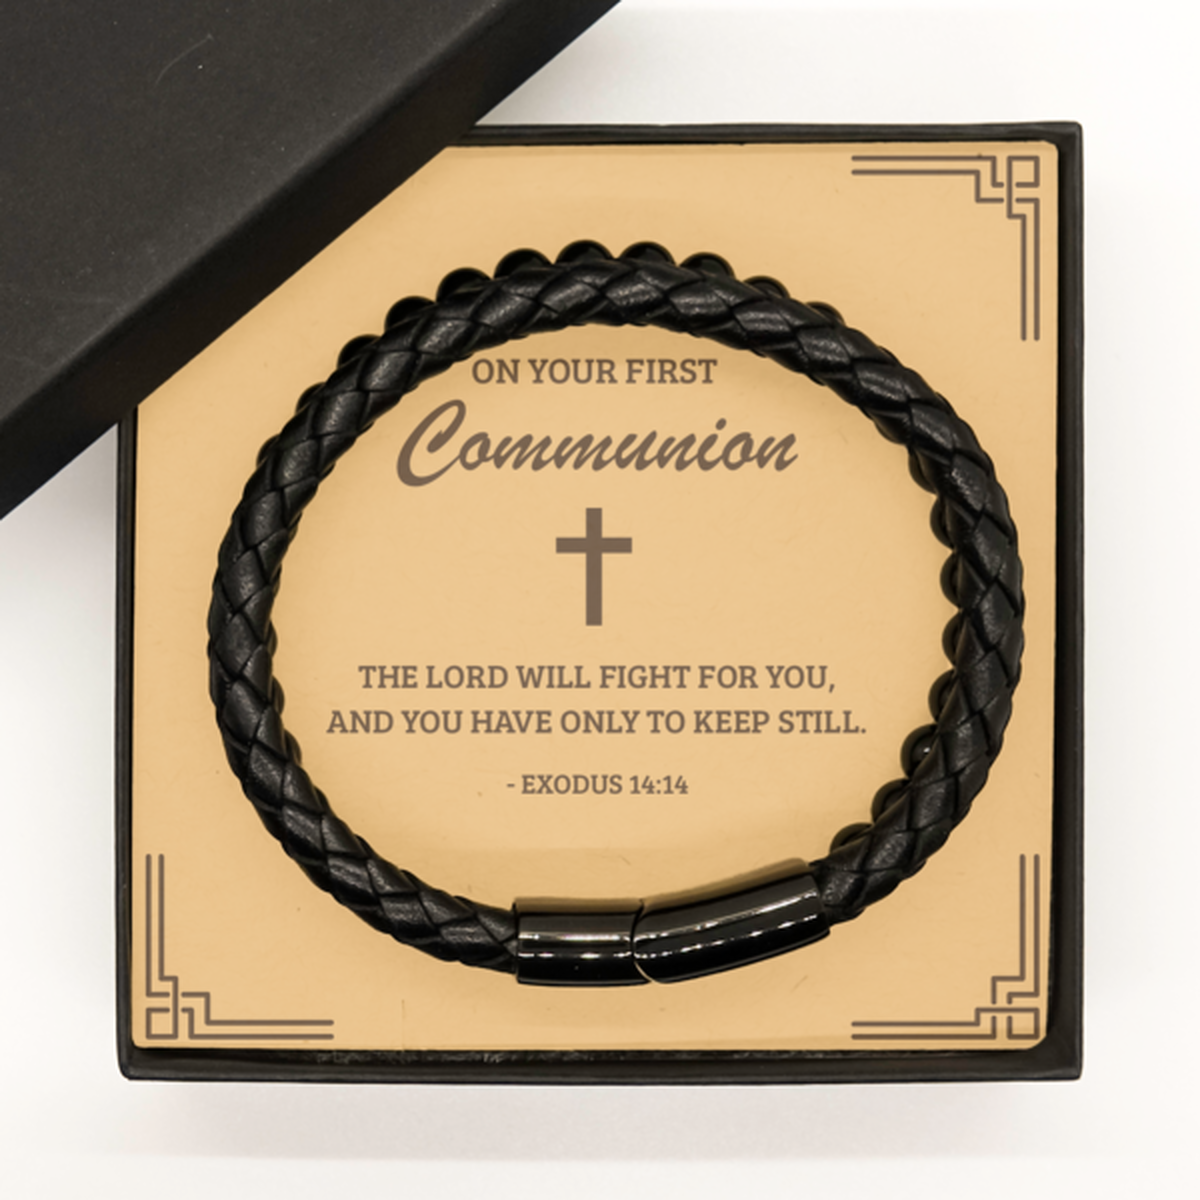 First Communion Gifts for Teenage Boys, The Lord will fight for you, Stone Leather Bracelet with Bible Verse Message Card, Religious Catholic Bracelet for Son, Grandson, Dad, Godfather